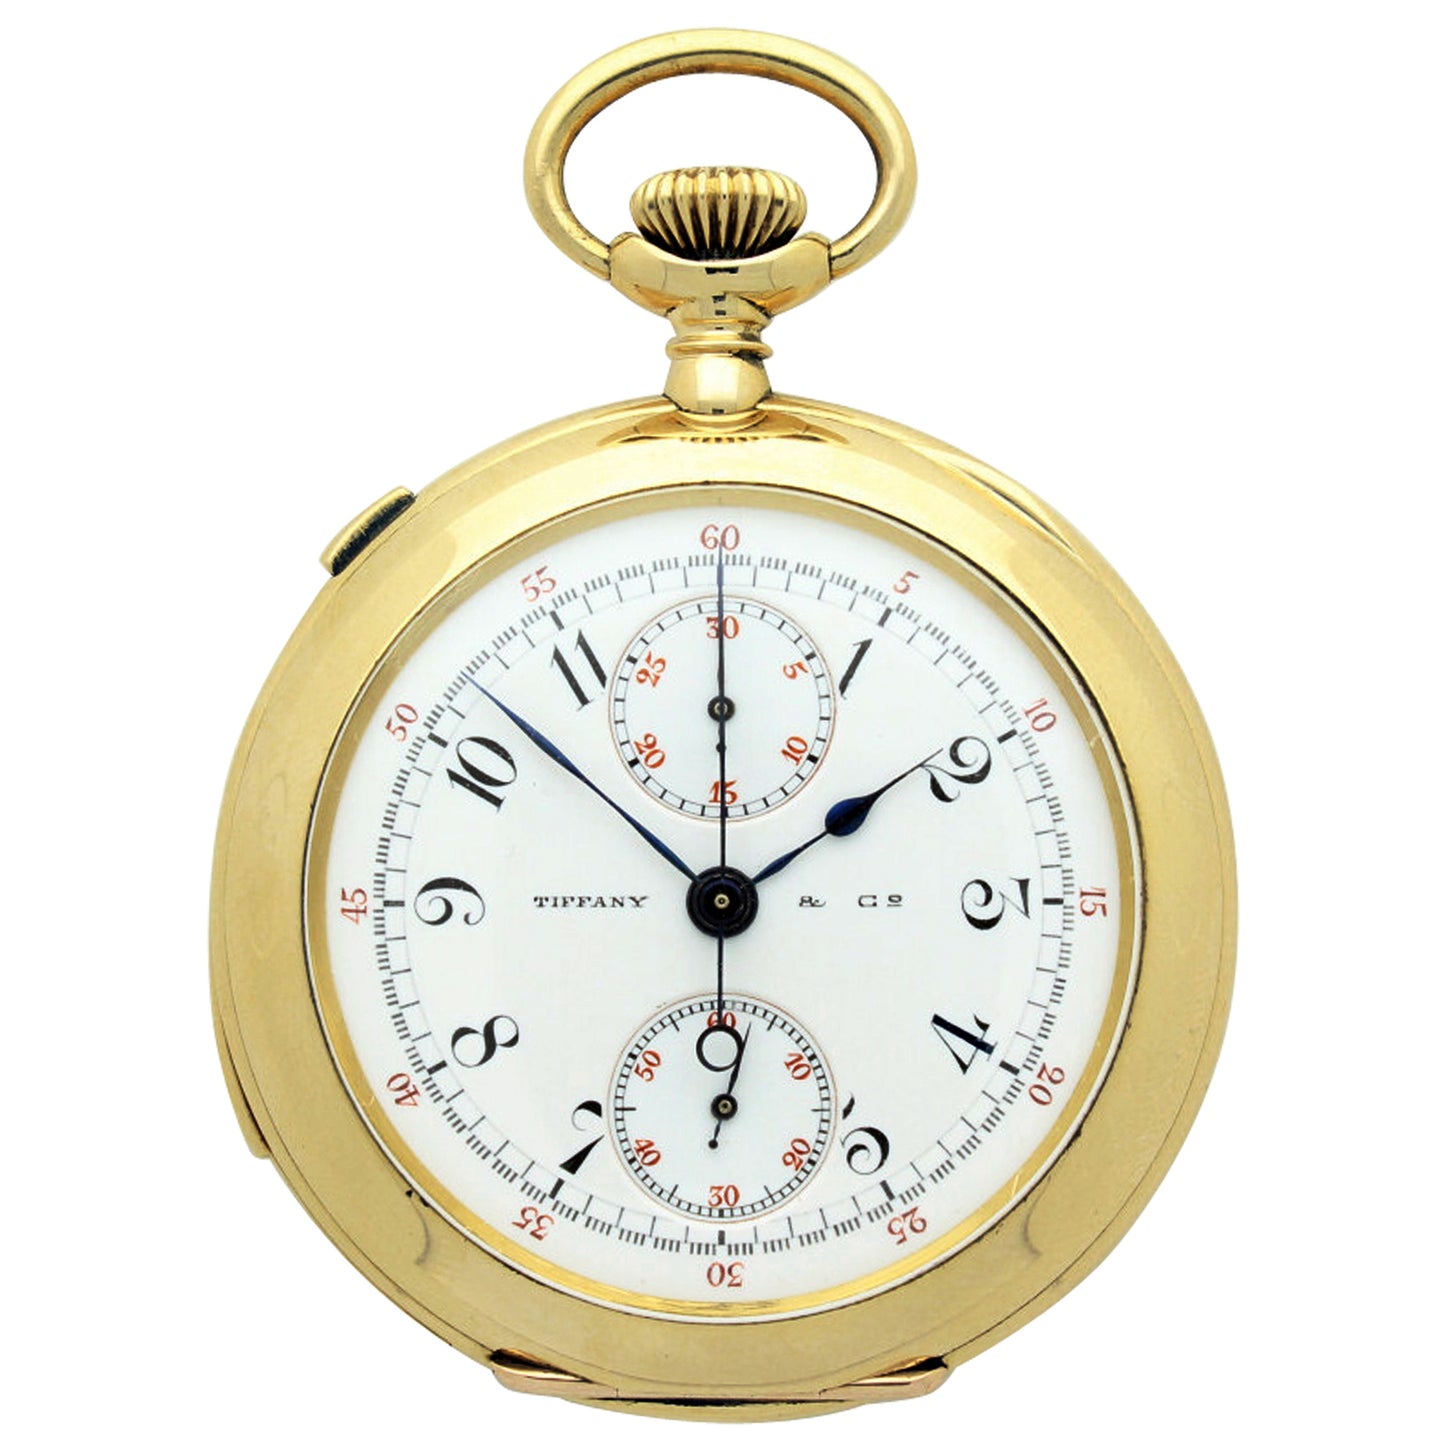 18ct yellow gold Patek Philippe open face split second minute repeating pocket watch, retailed by TIFFANY & Co. Made 1903